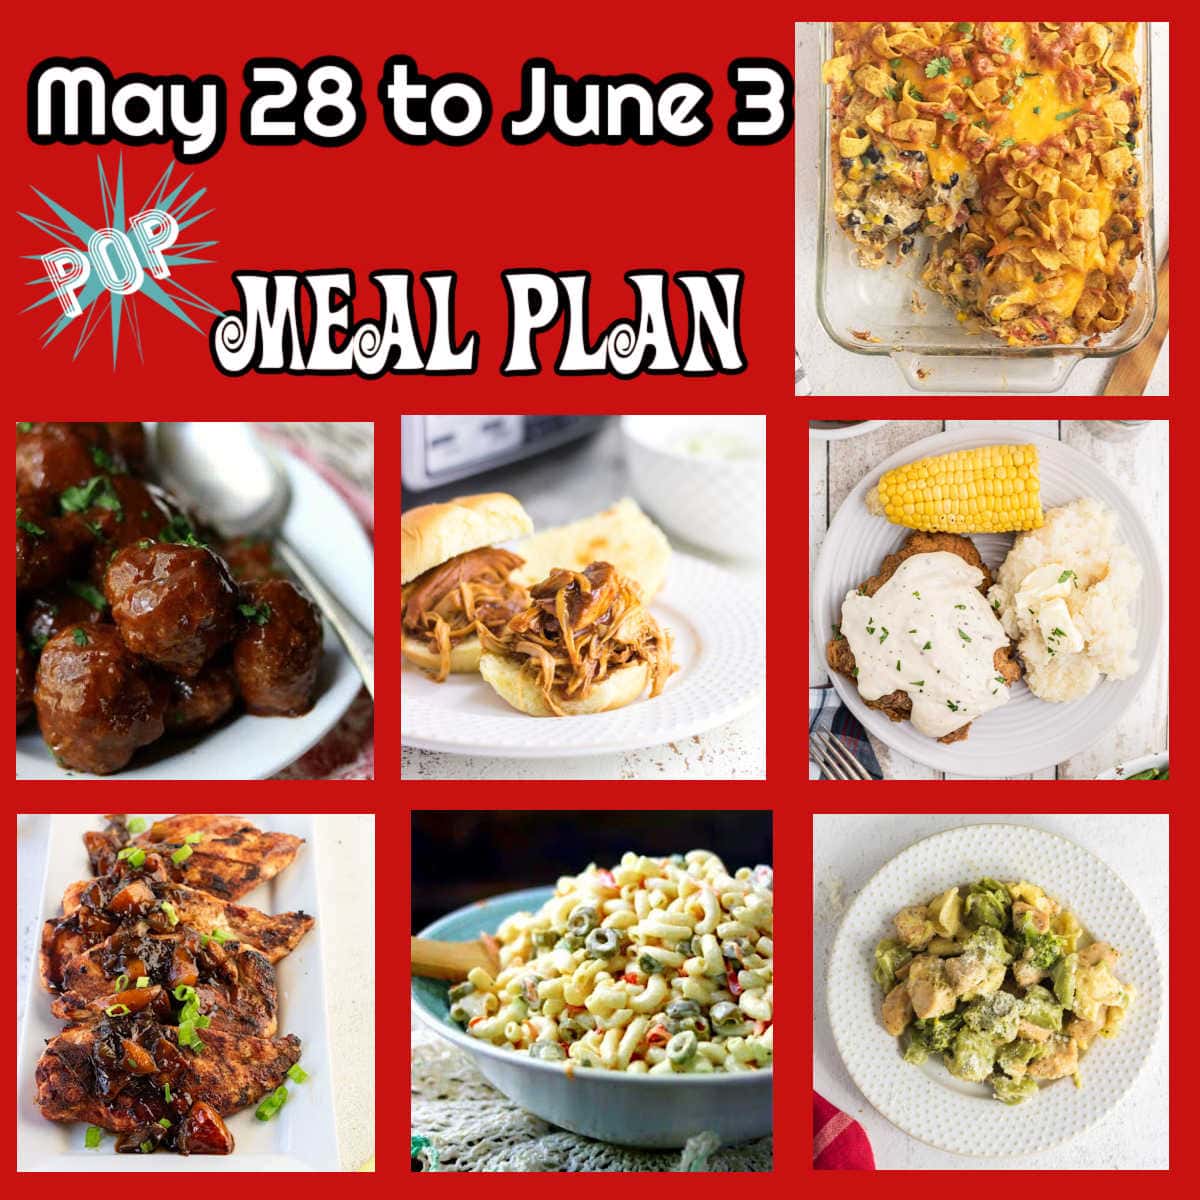 Meal plan title image for May 28 to Jun 3.